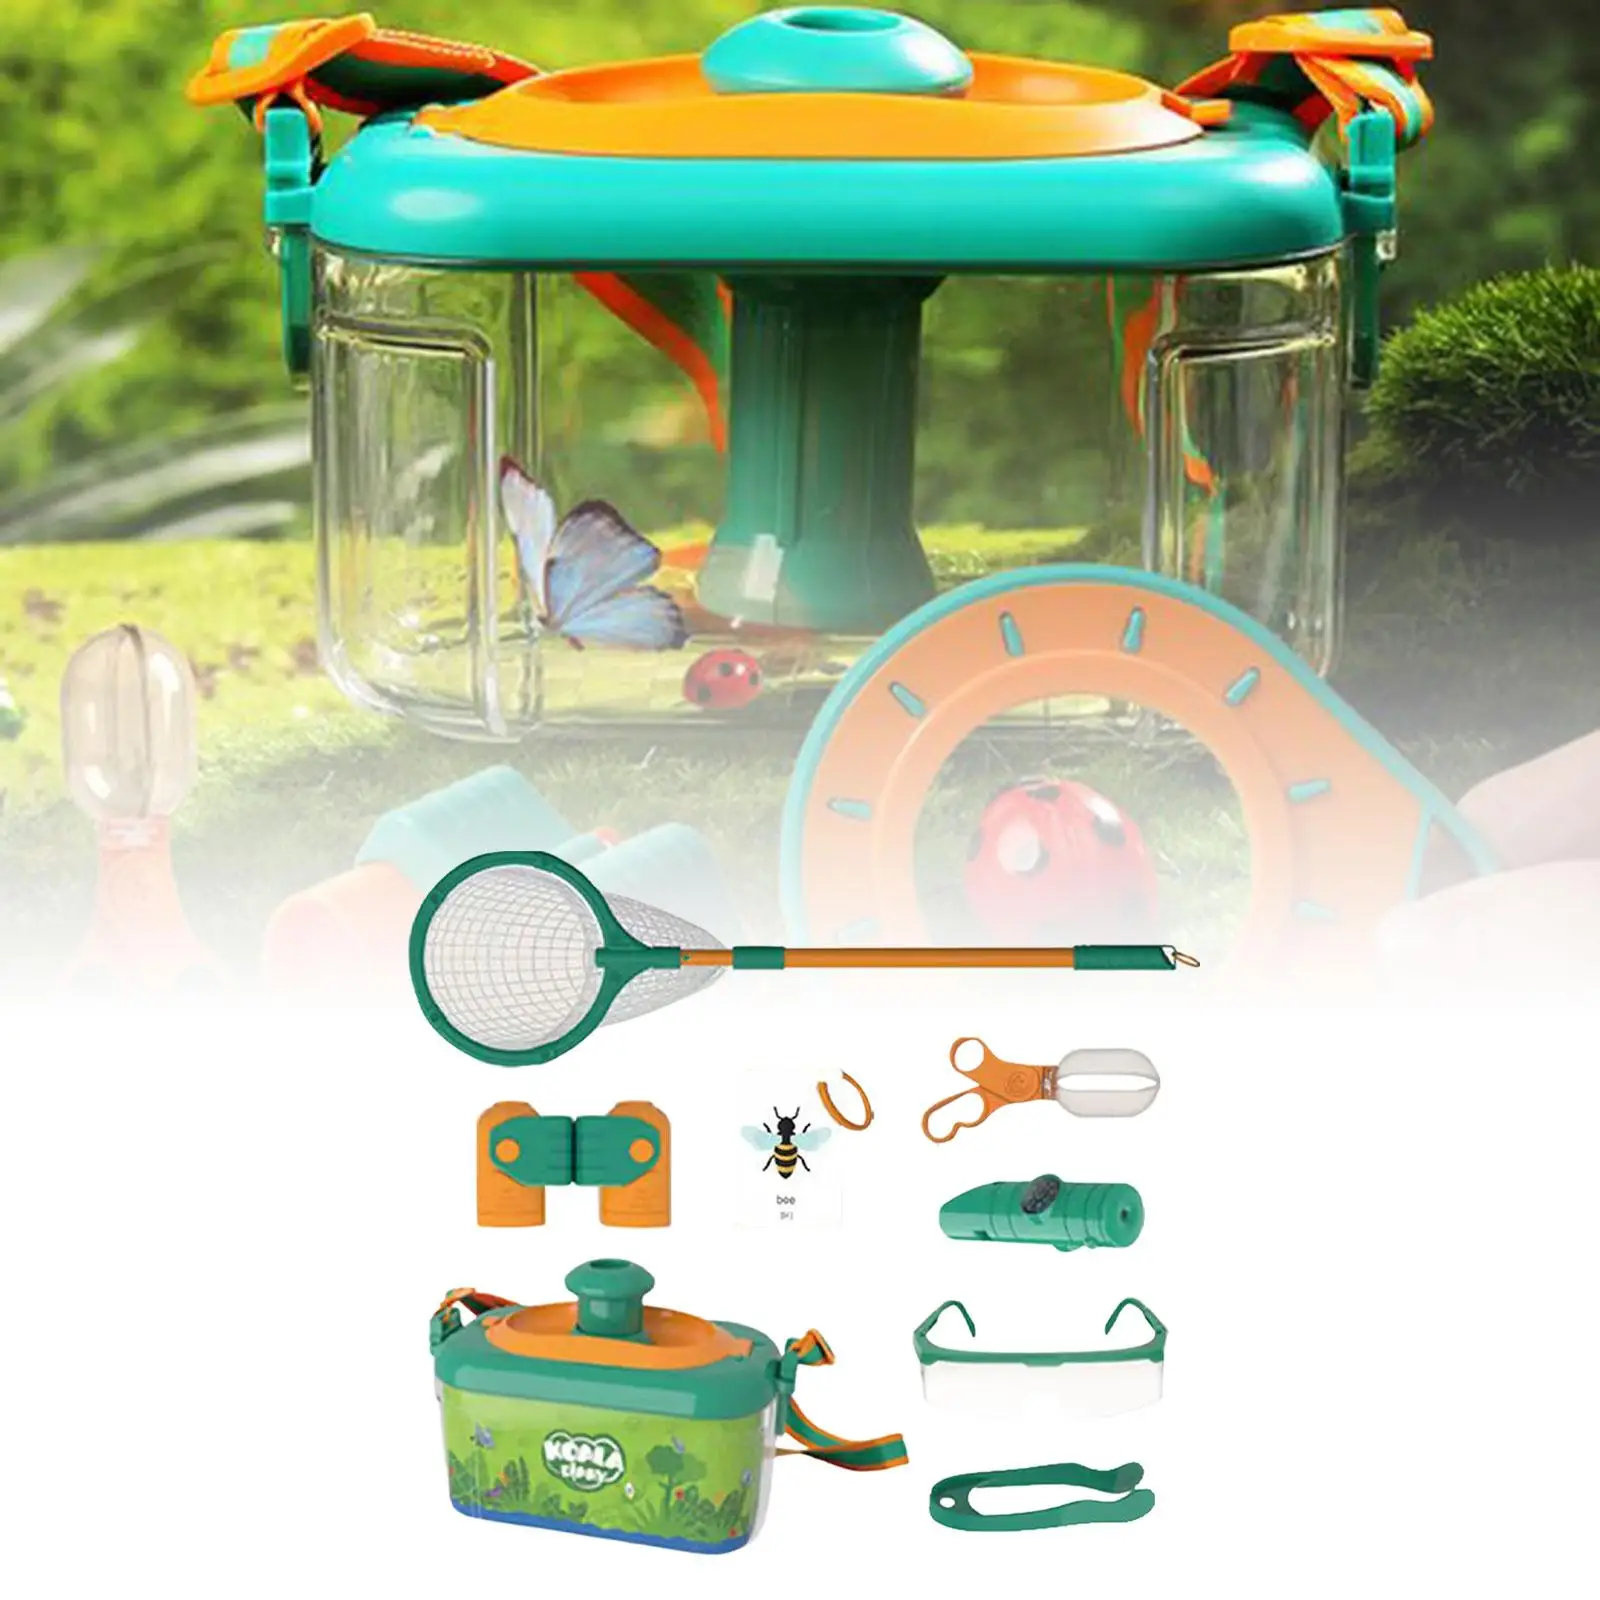 Viewer Box, Observation Box, Portable Exploration Equipment Supplies Viewer for Boys Girls